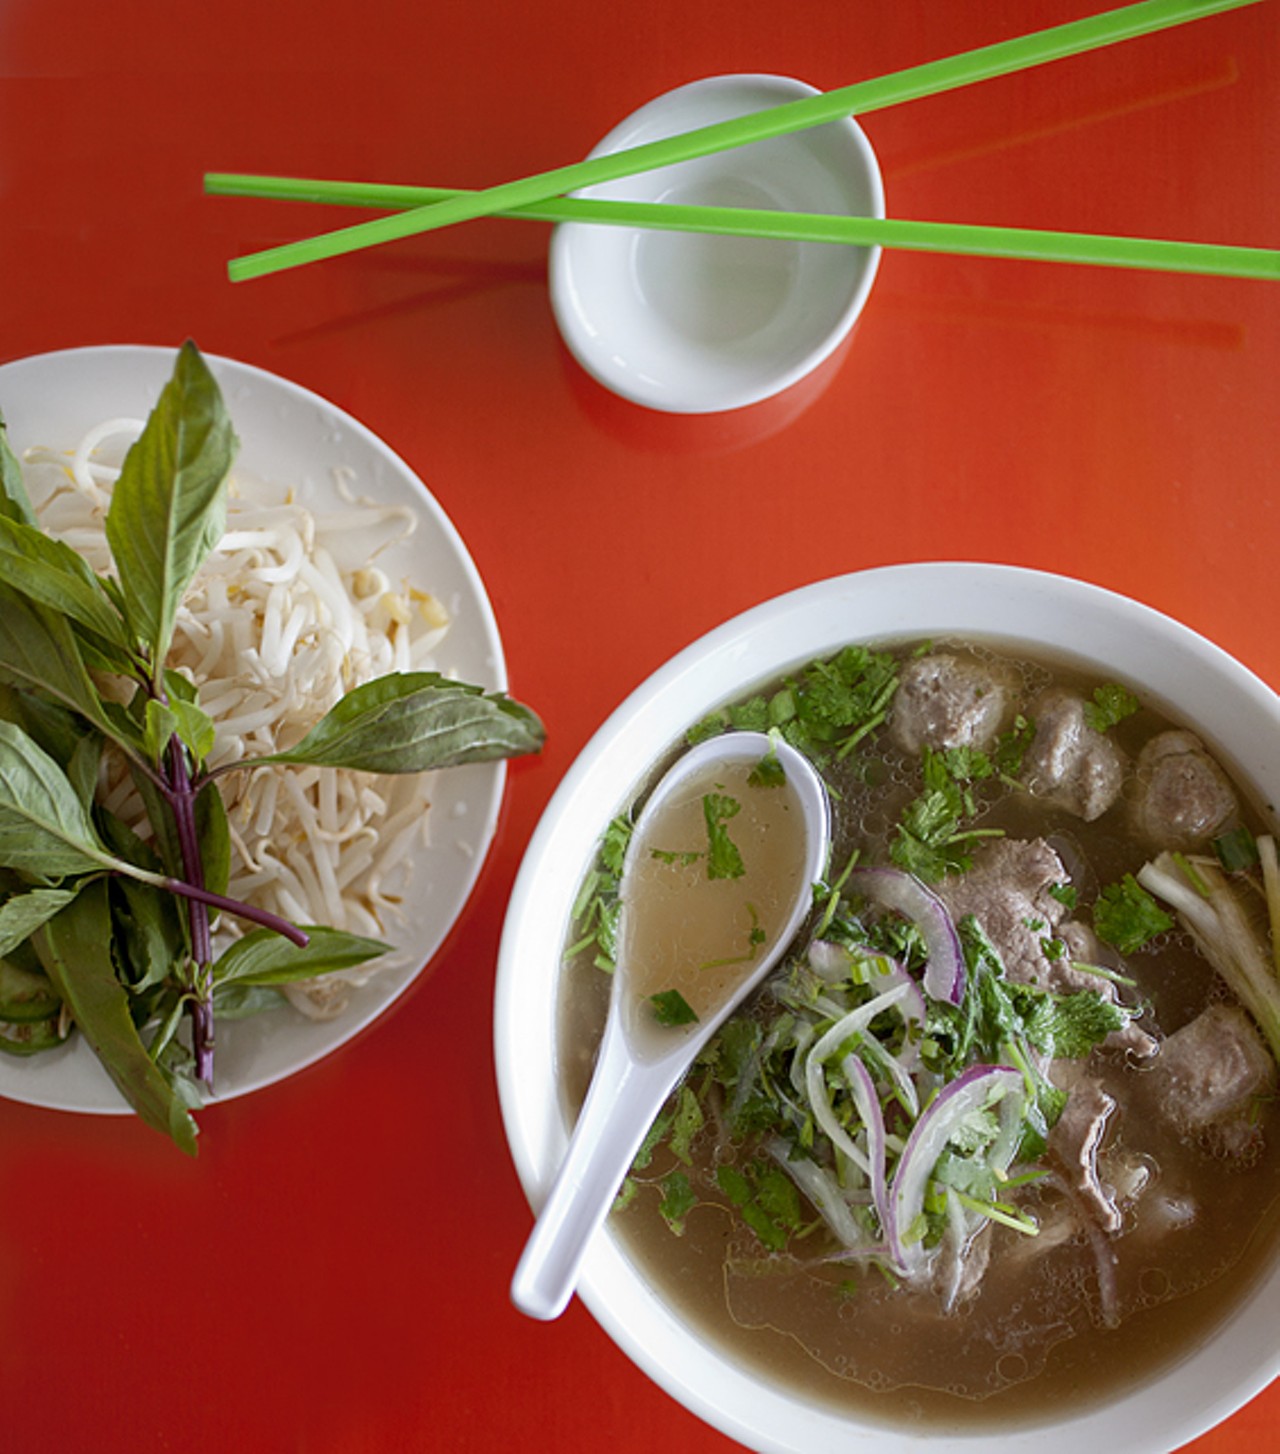 Pho Dac Biet is the special beef noodle soup.